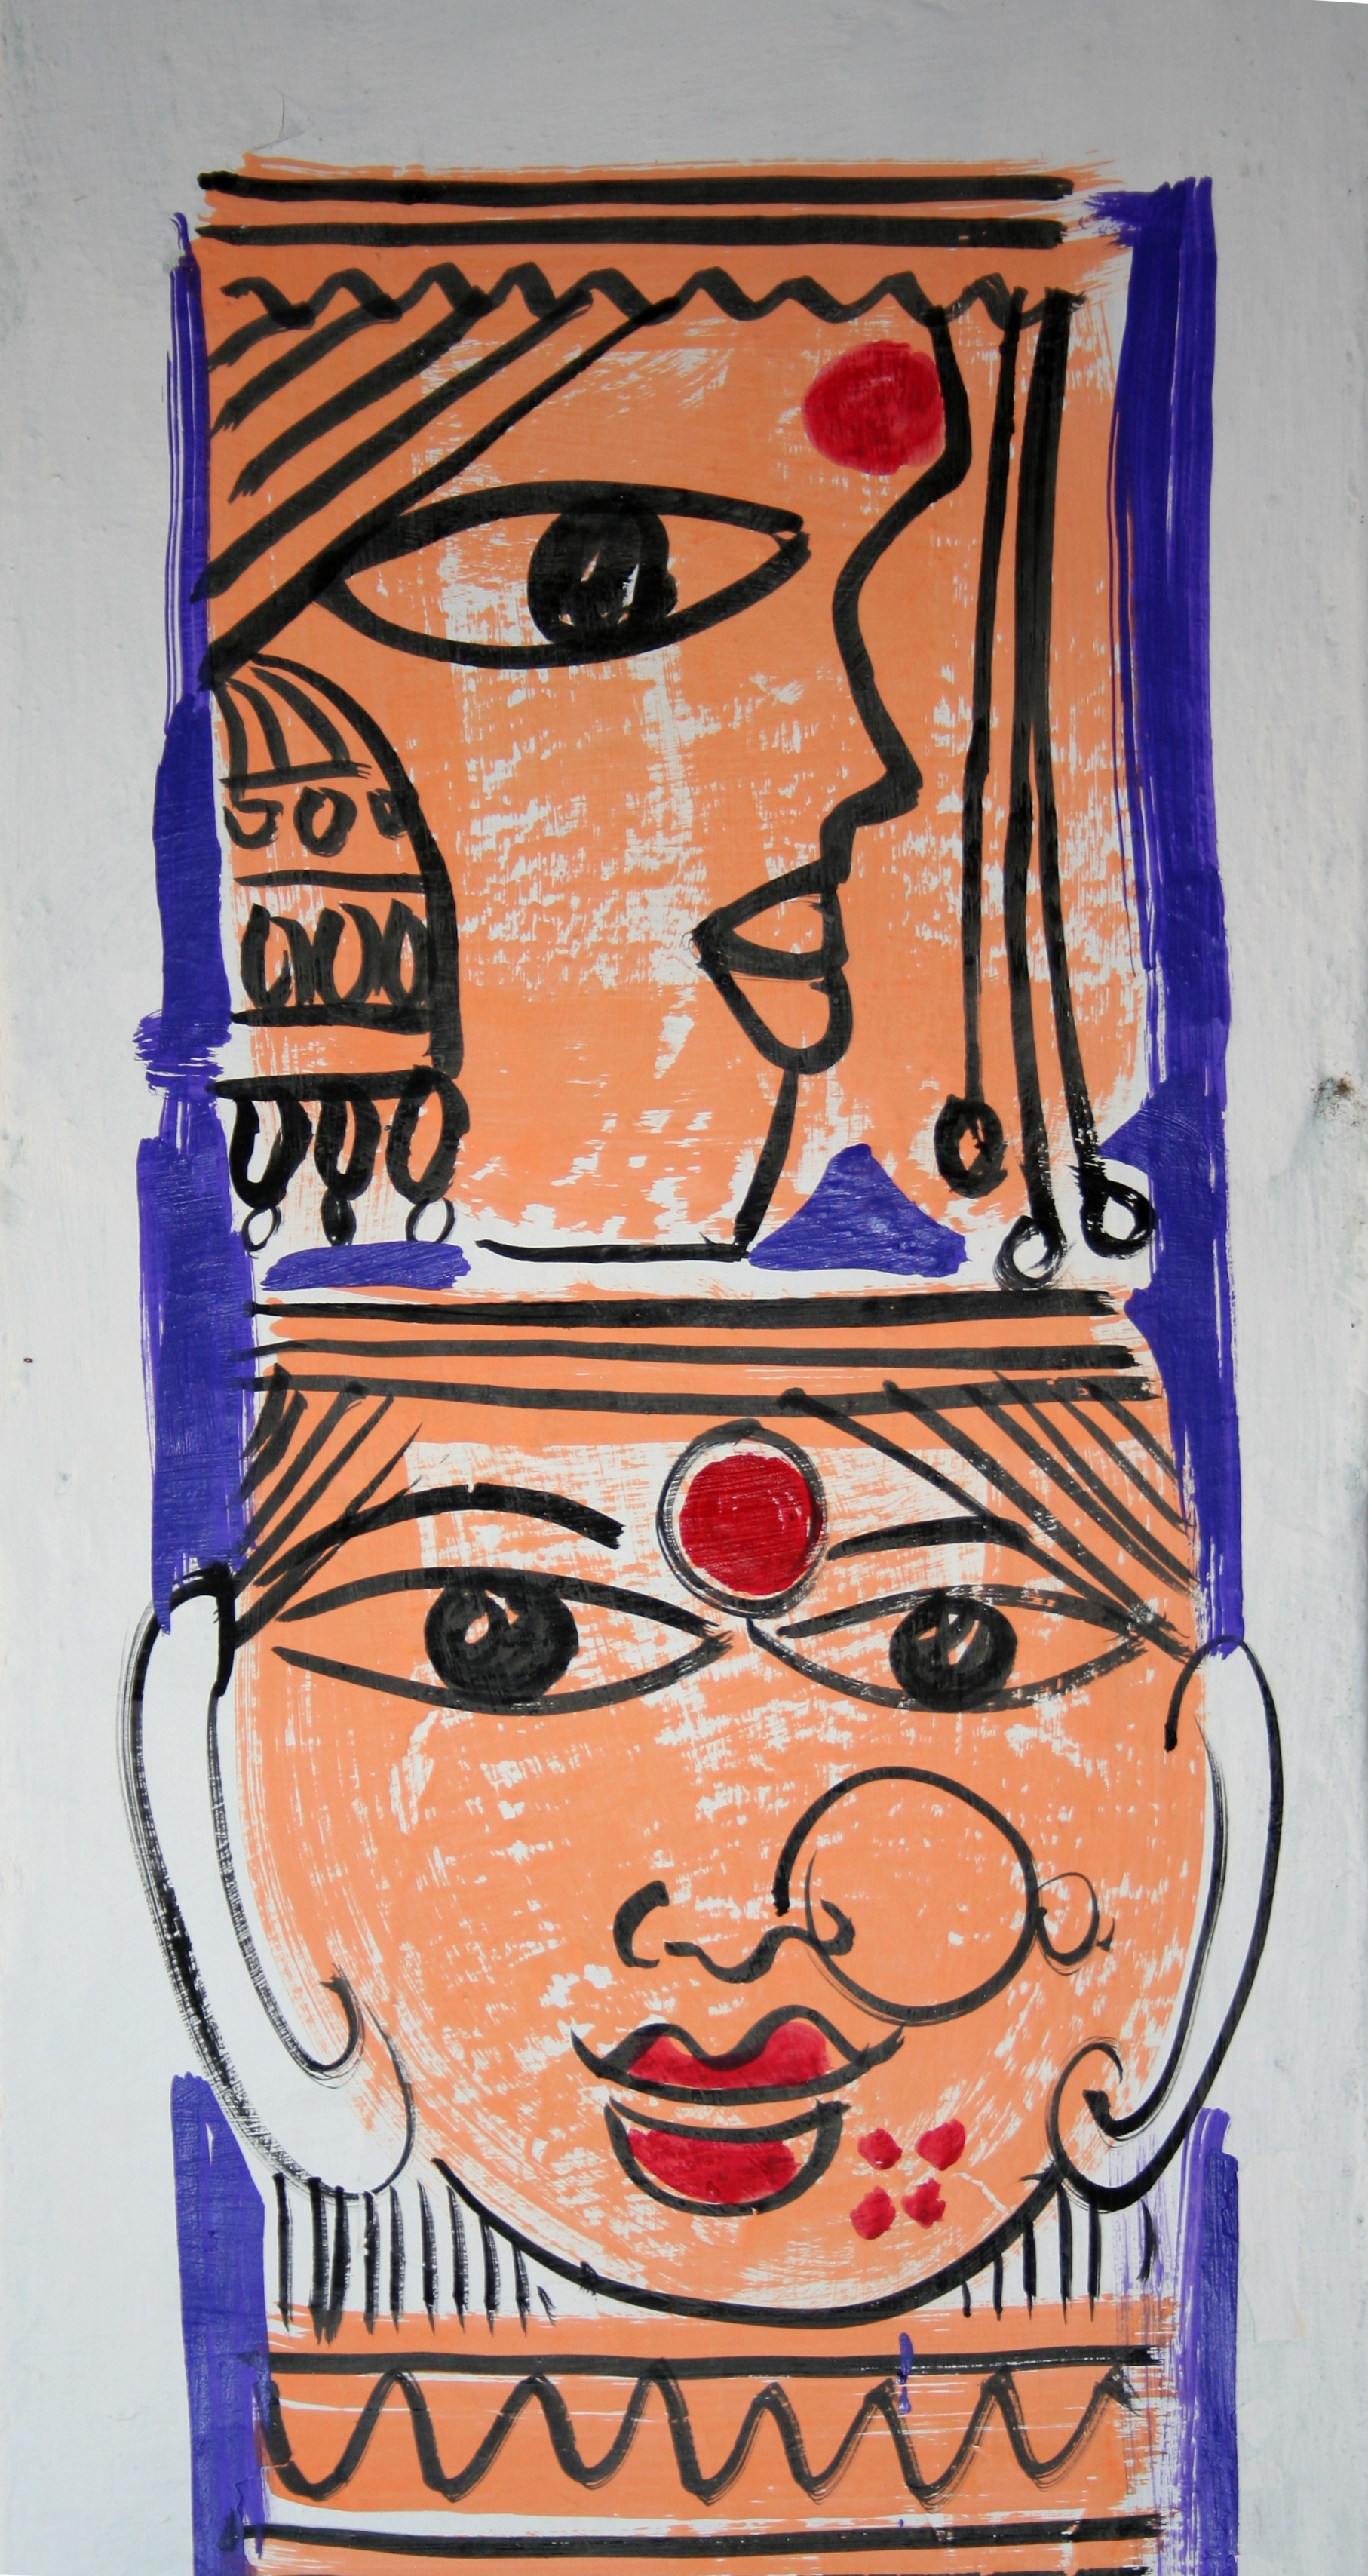 Women's heads, traditional wall painting by villagers, near Katni, M.P., India